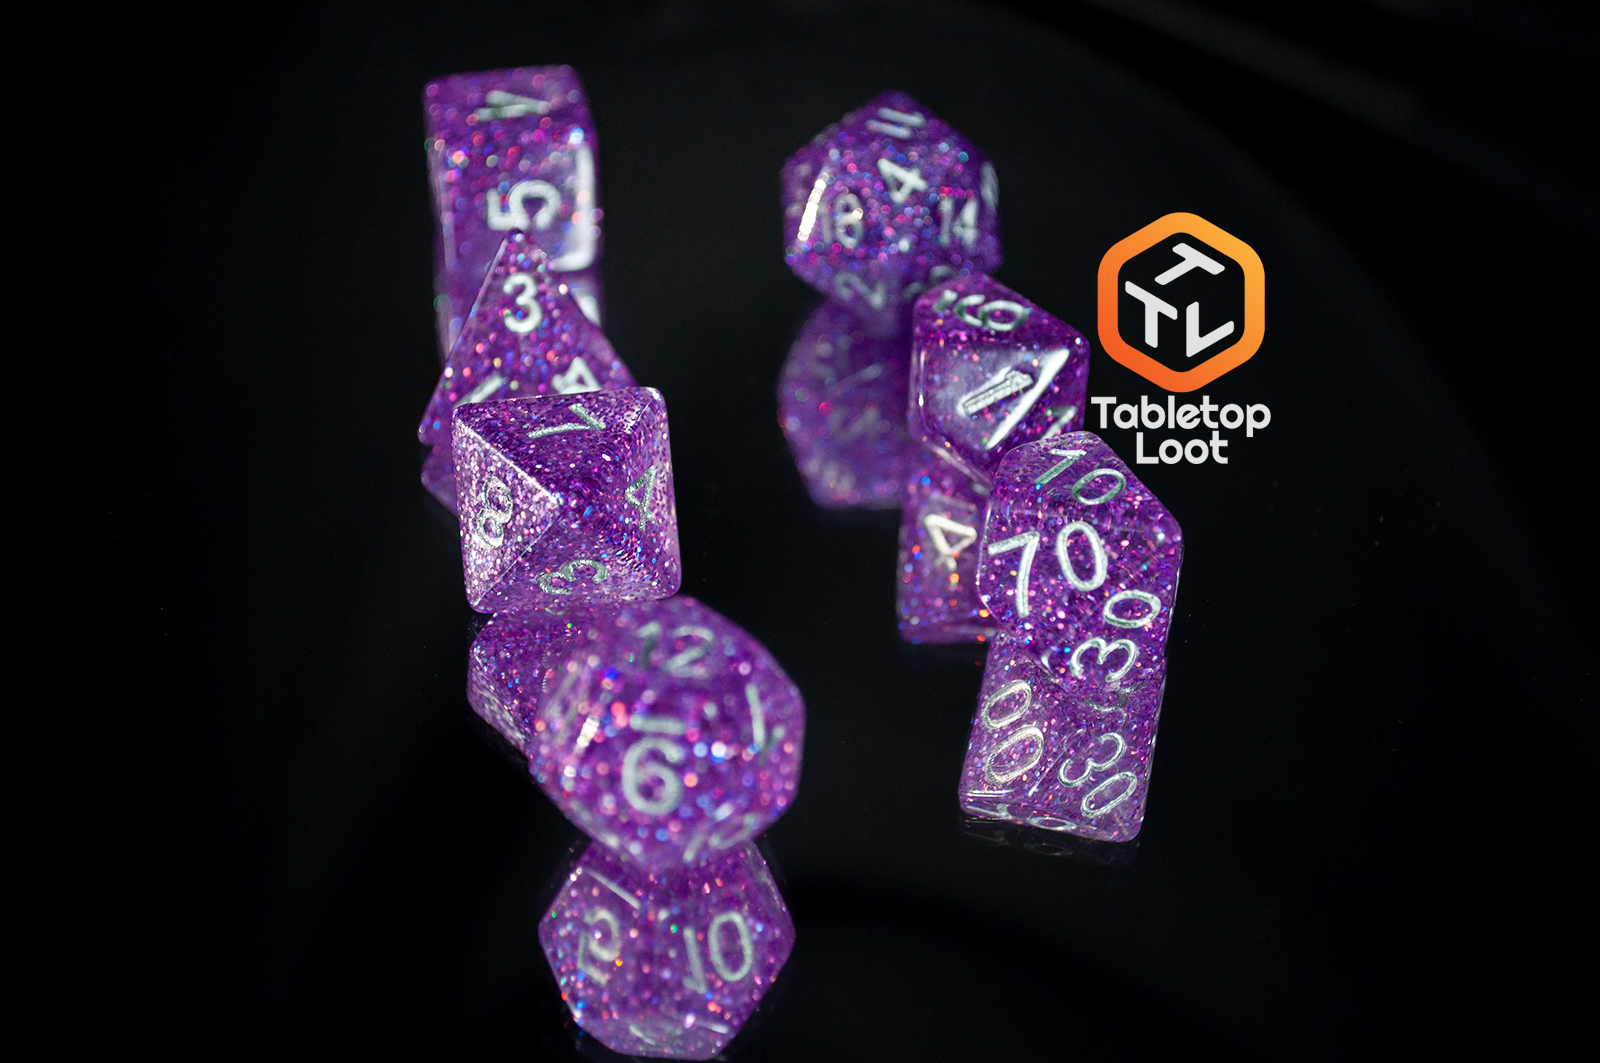 The Faerie Fire 7 piece dice set from Tabletop Loot packed with purple and blue iridescent sparkles in translucent purple with silver numbering.